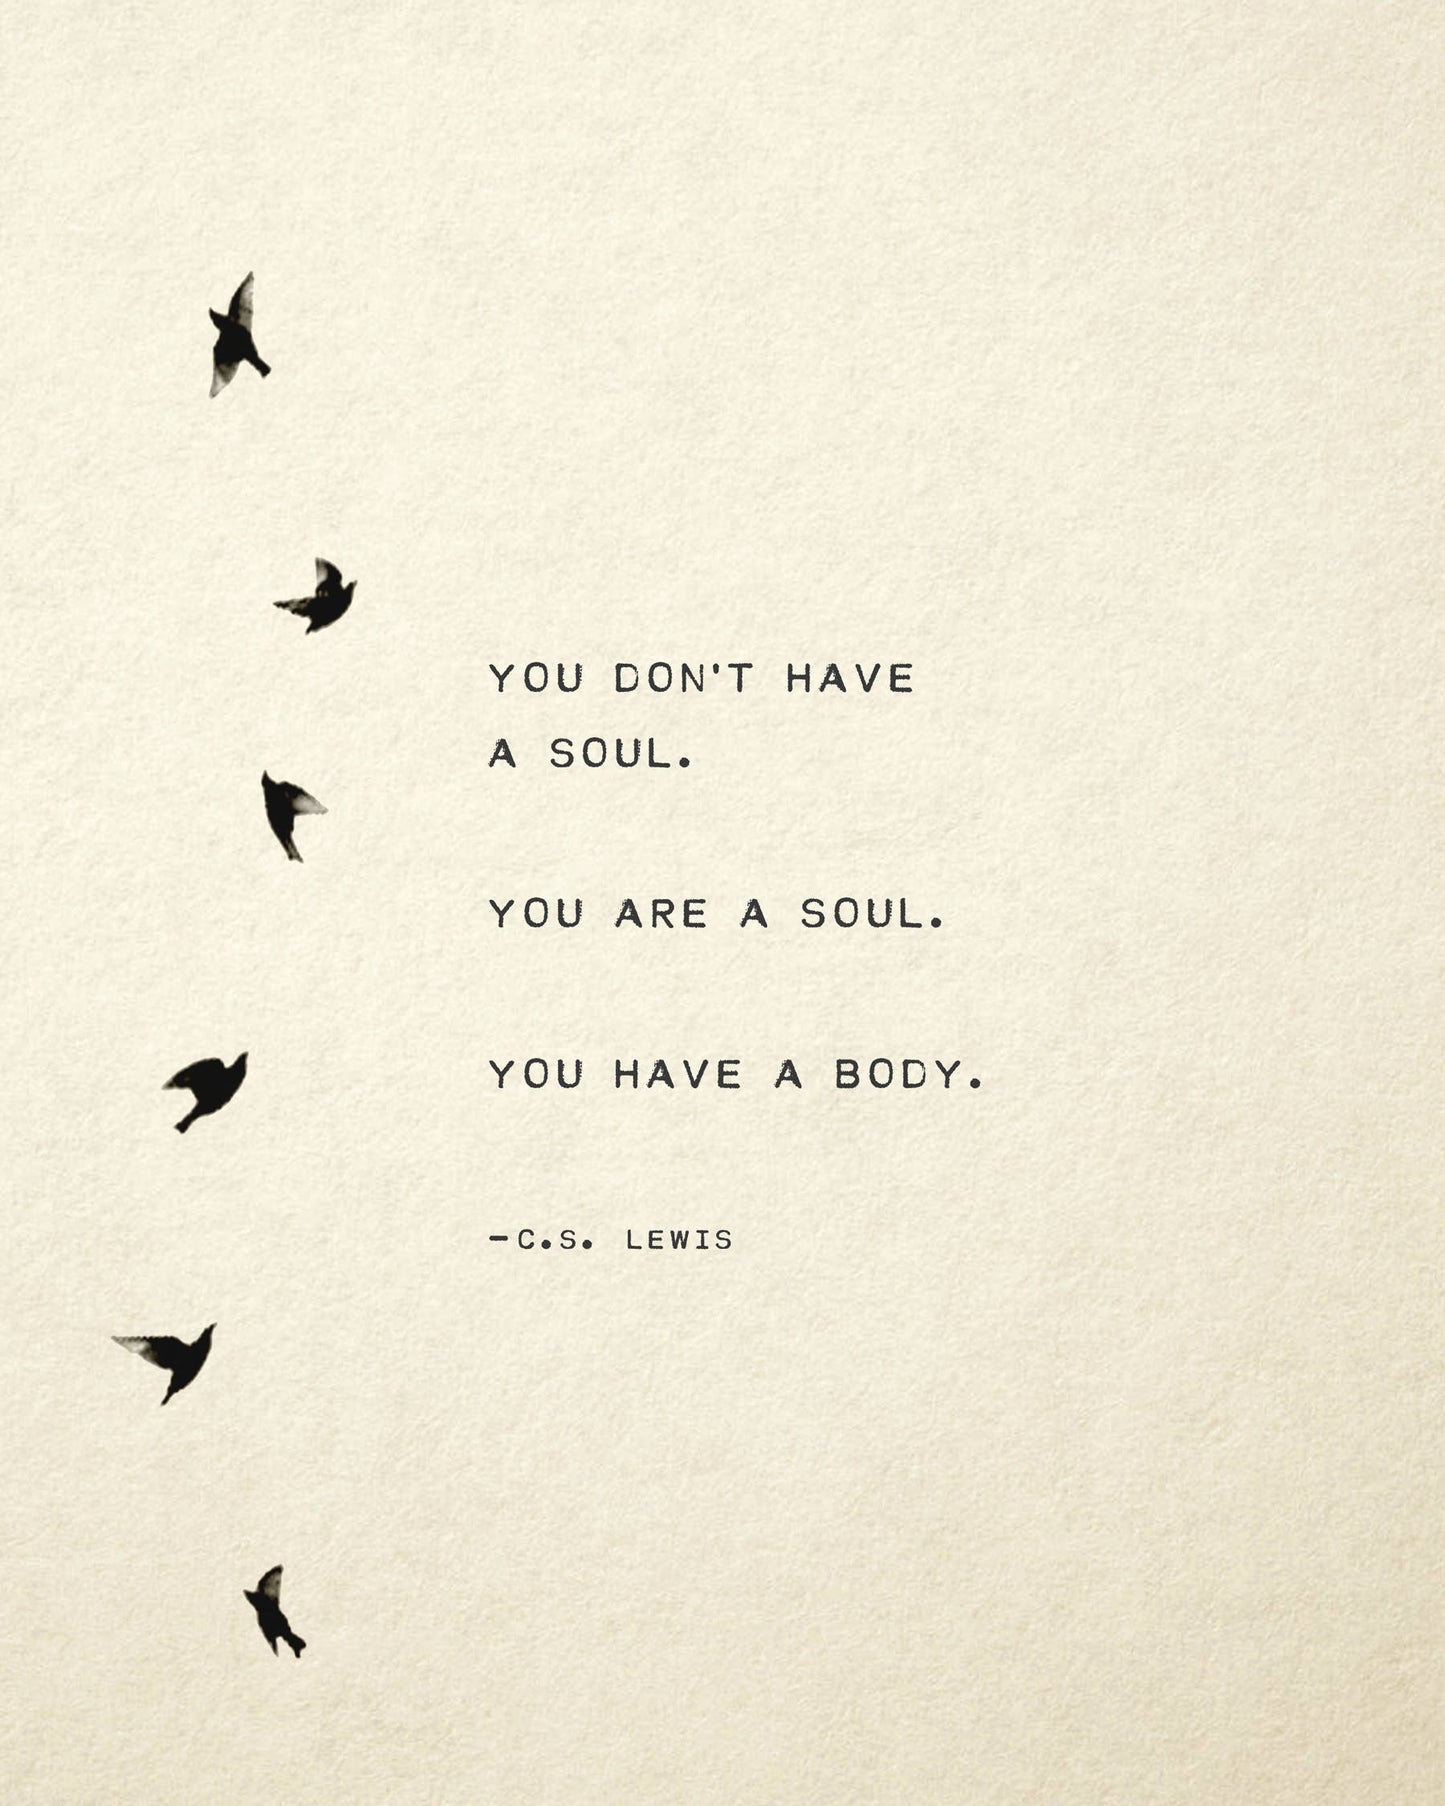 C.S. Lewis Quote "You don’t have a soul. You are a soul. You have a body." Wall Decor. Quote Print. Inspirational quote. C.S. Lewis art